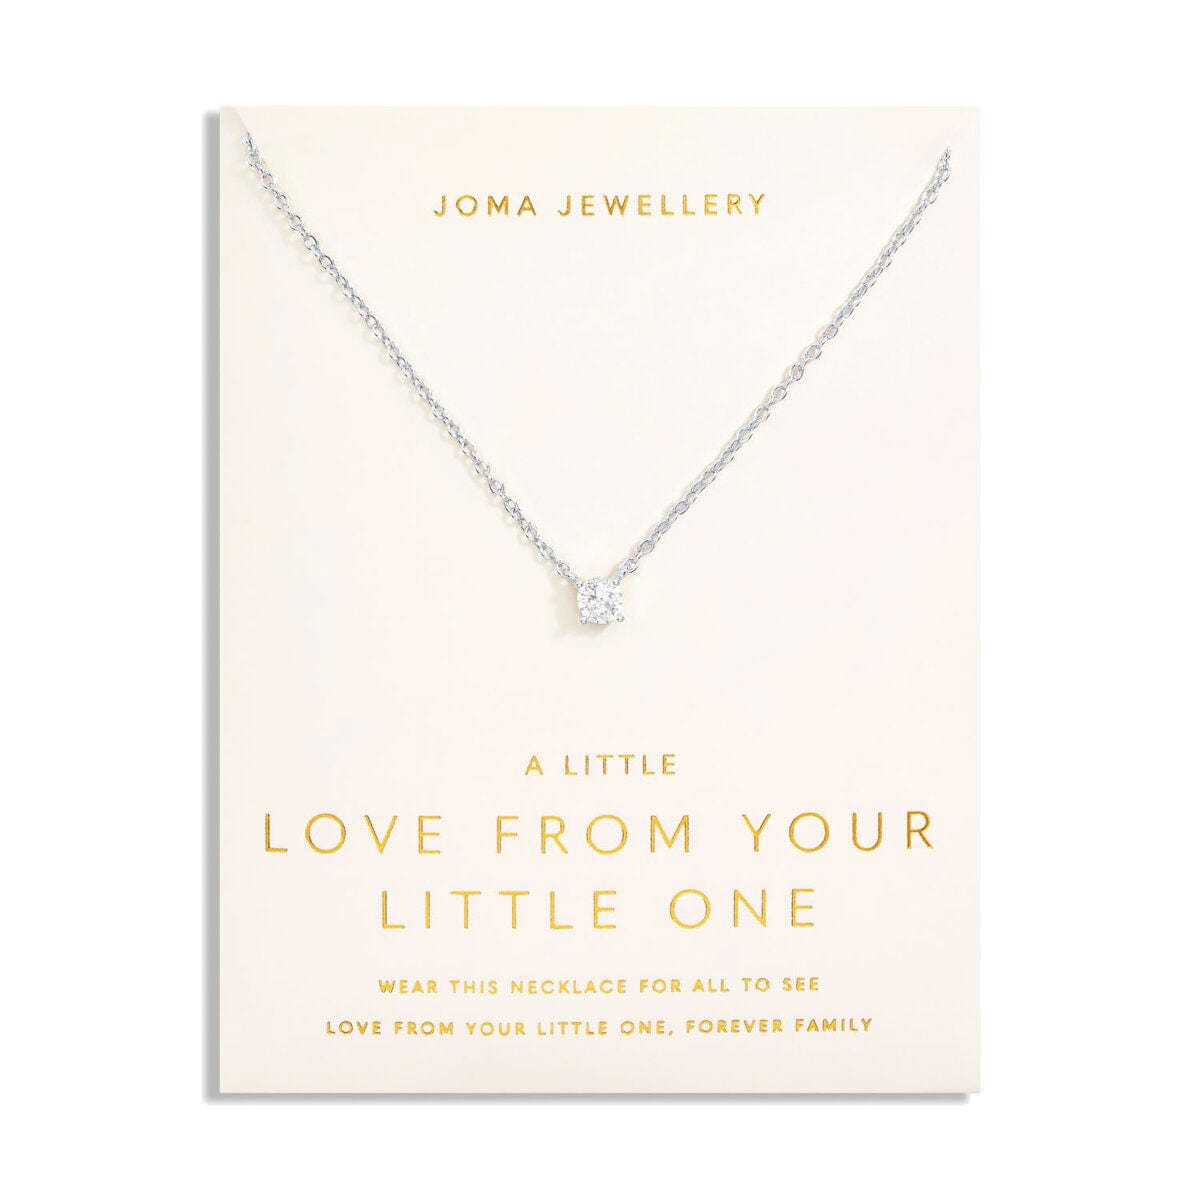 Joma Jewellery Necklace Joma Jewellery A Little Love From Your Little One Necklace - Silver